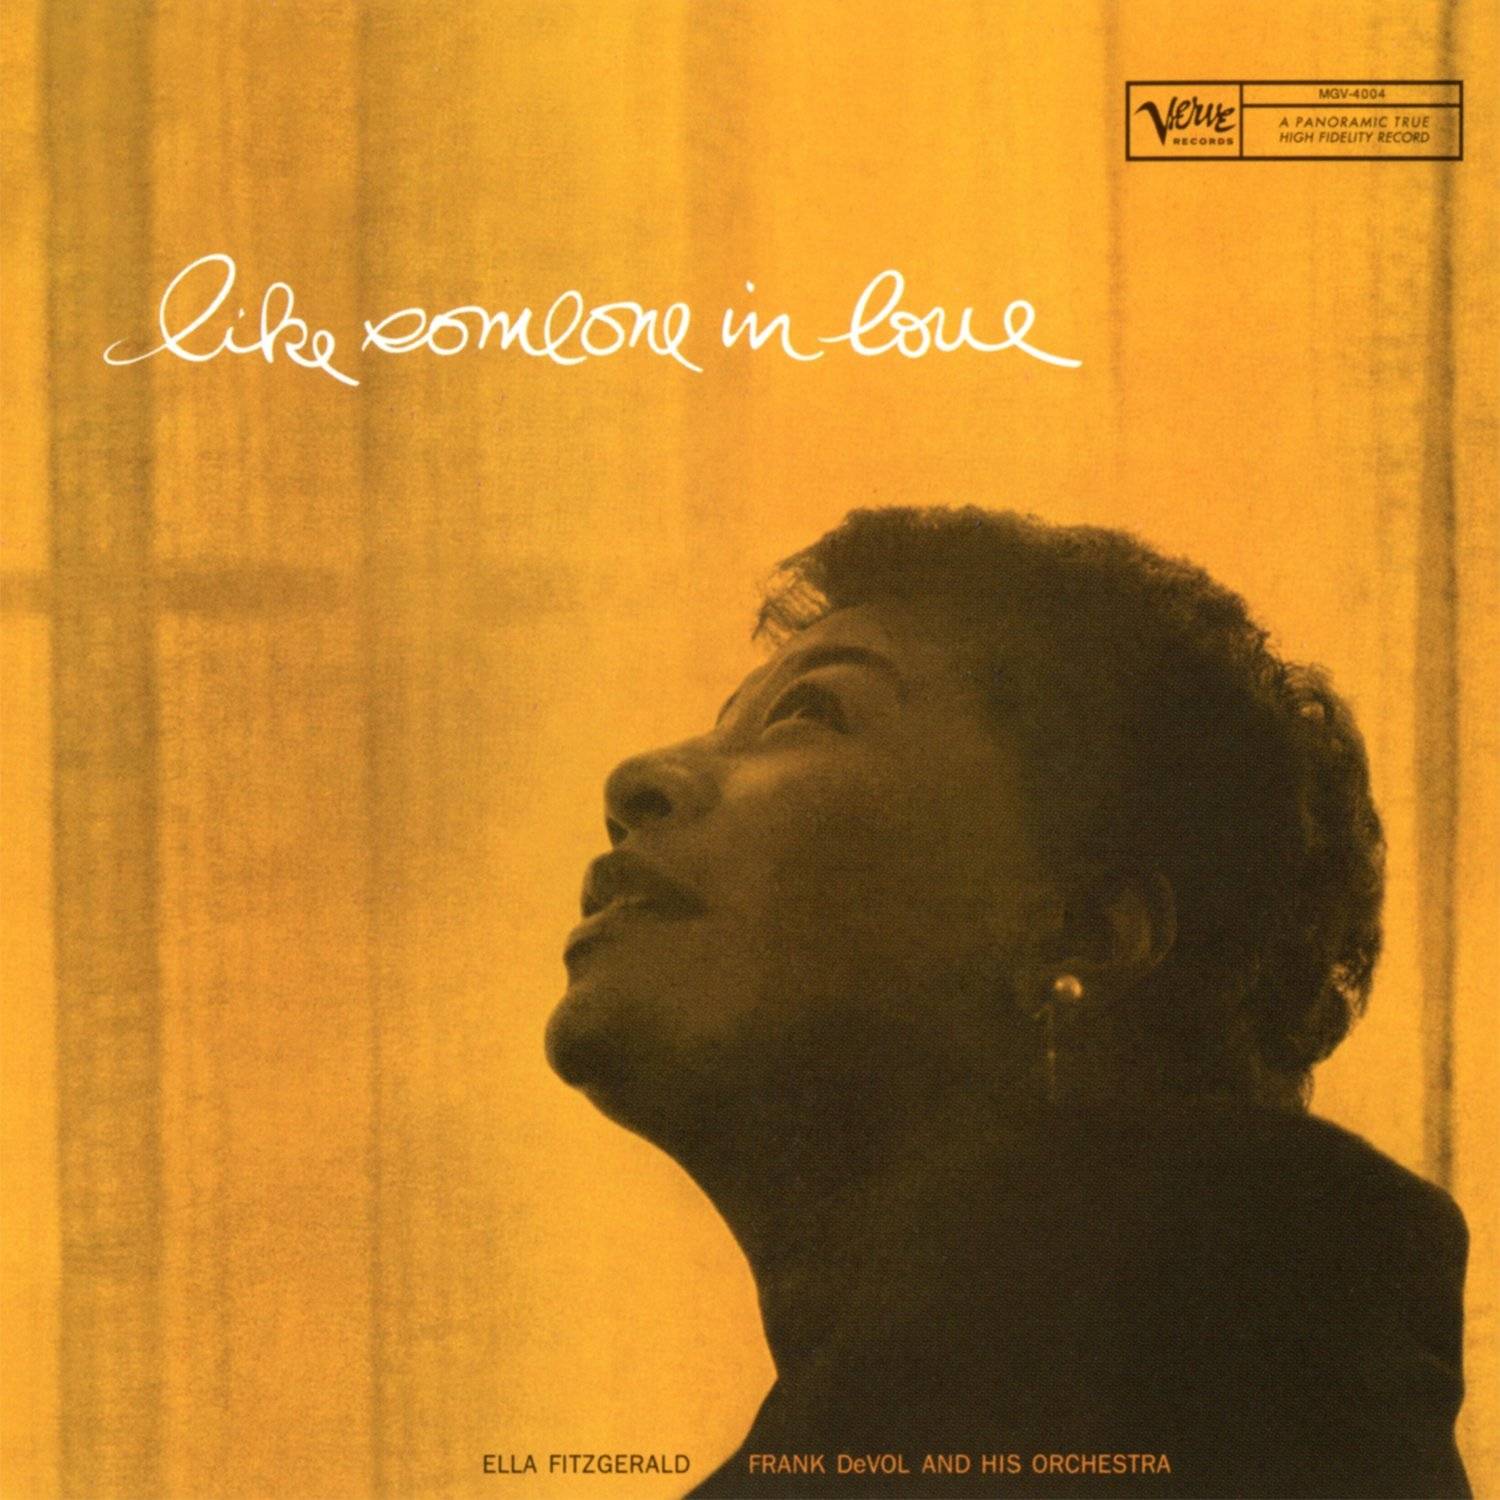 Ella Fitzgerald - Like Someone In Love (1957) [Analogue Productions 2011] SACD ISO + FLAC 24bit/44,1kHz